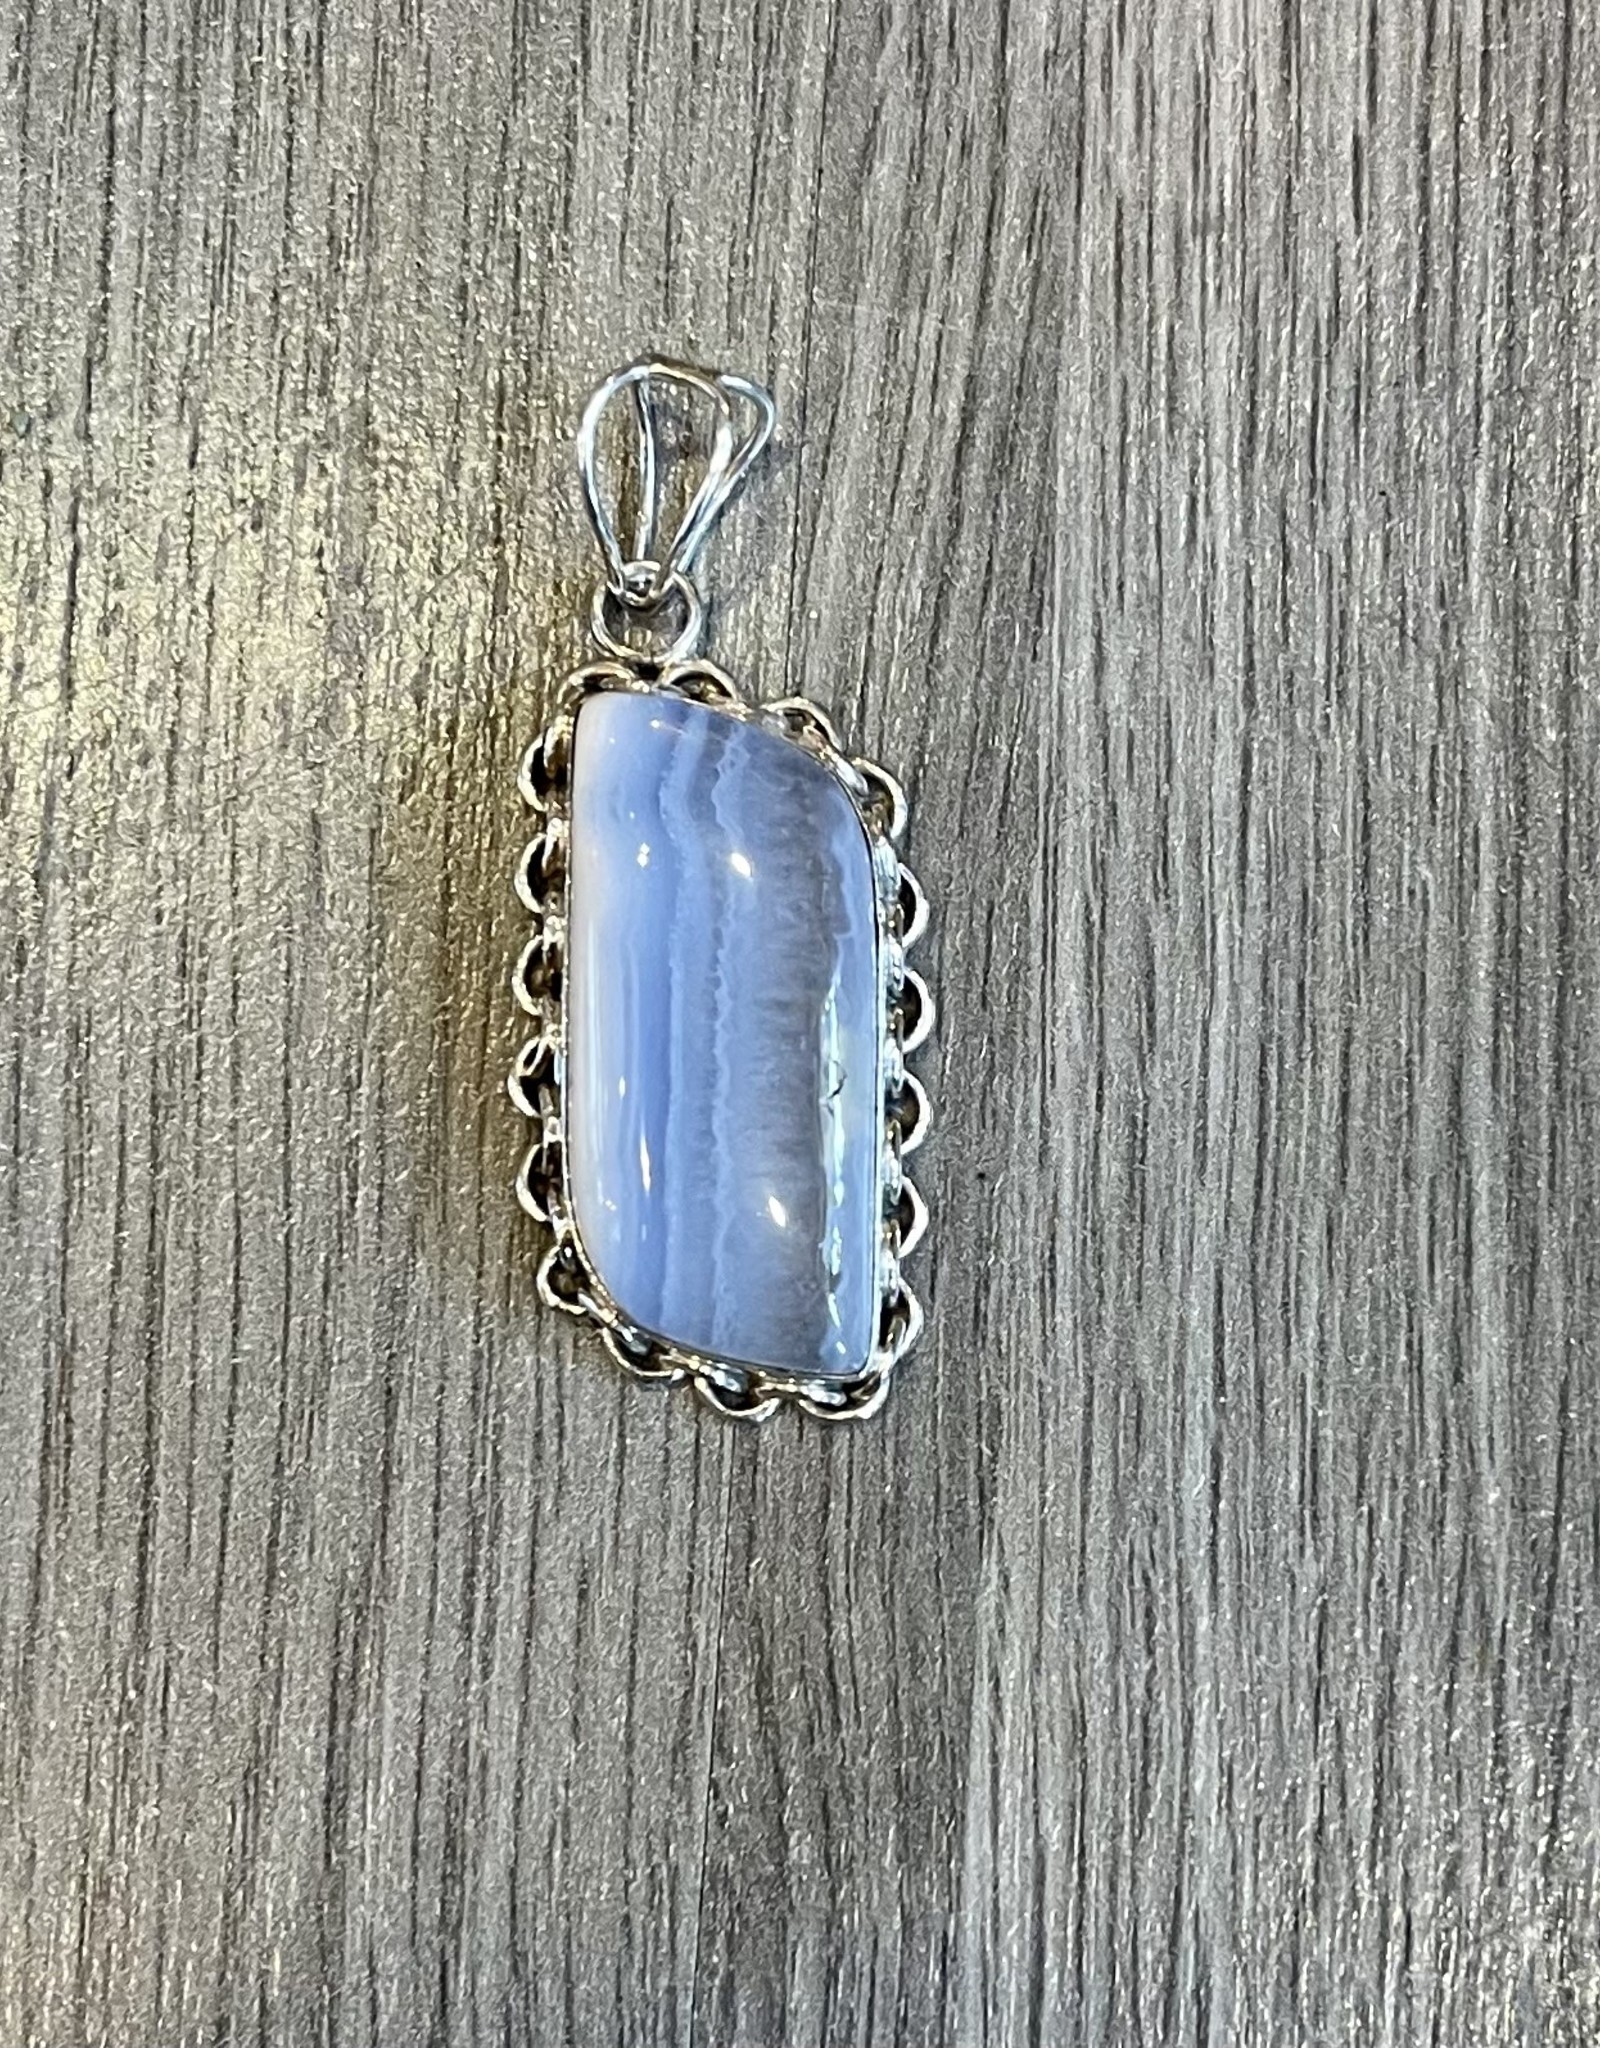 Jewelry - Blue Lace Agate Pendant .925